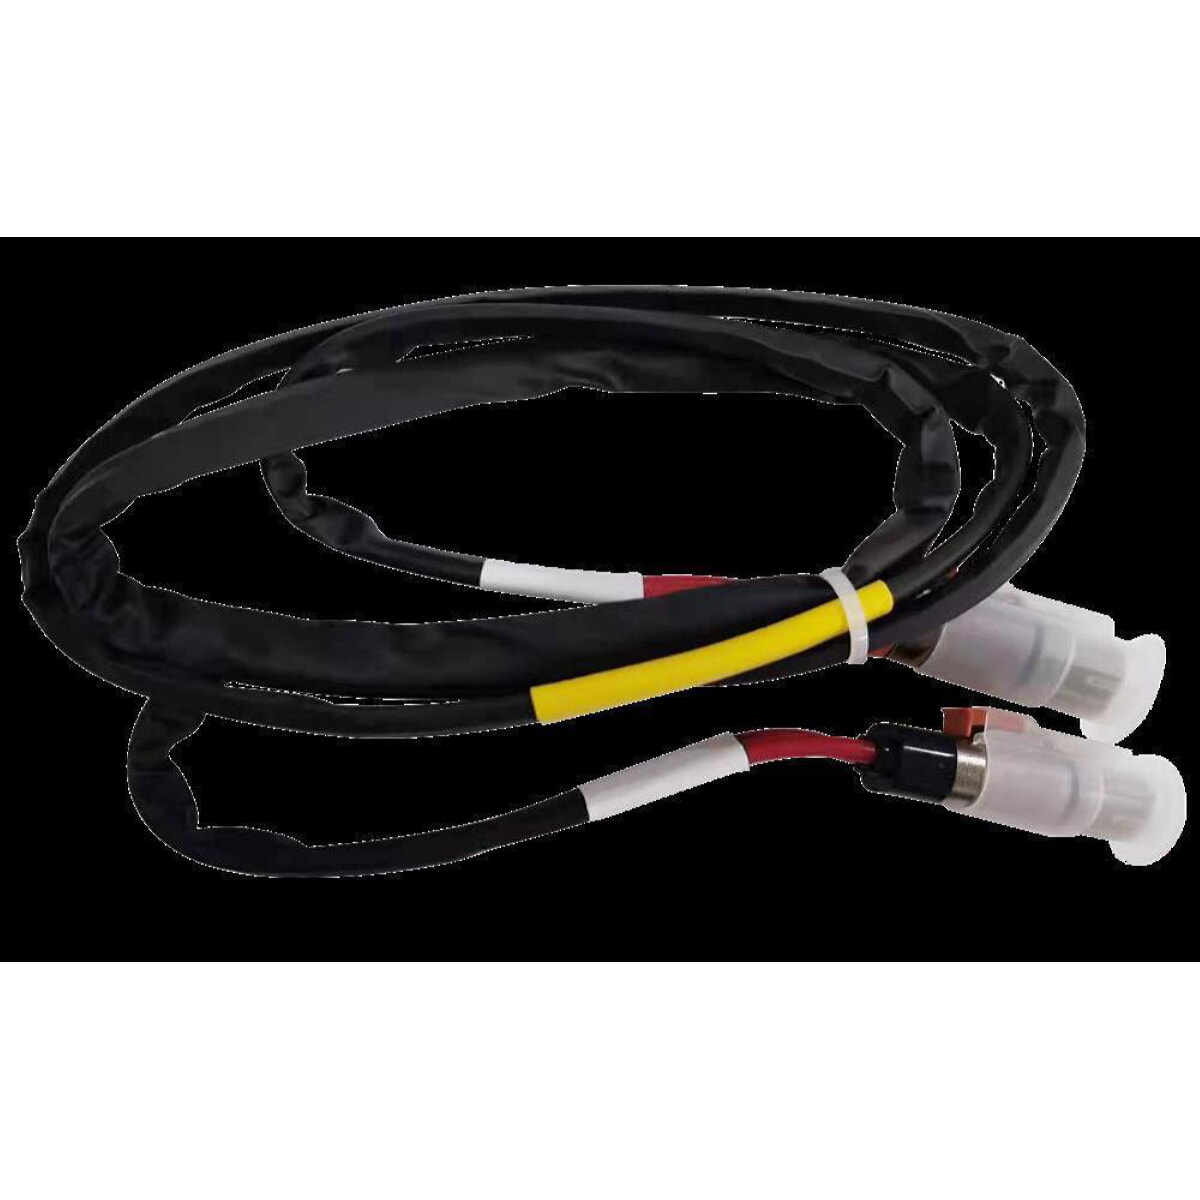 SolaX power cable for connecting 3xT30